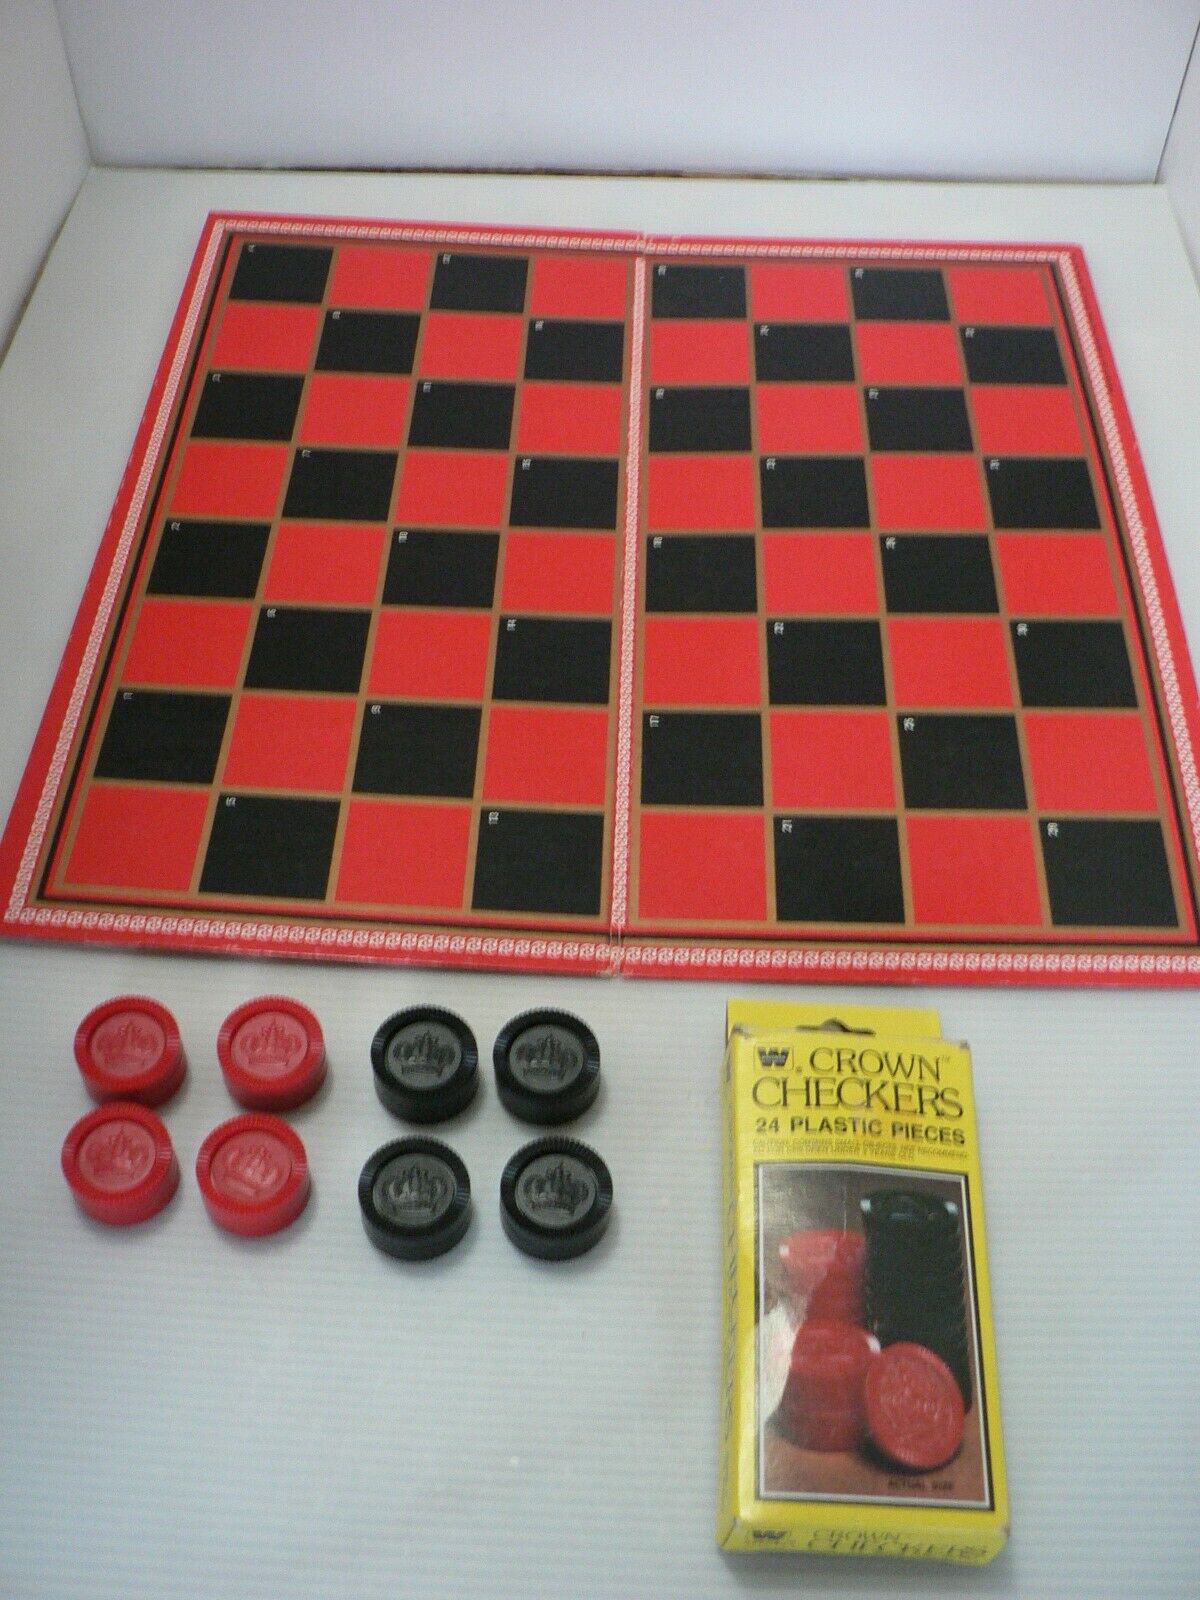 VINTAGE 1949 CHECKER BOARD WITH CROWN CHECKERS, WESTERN PUB. CO. USA